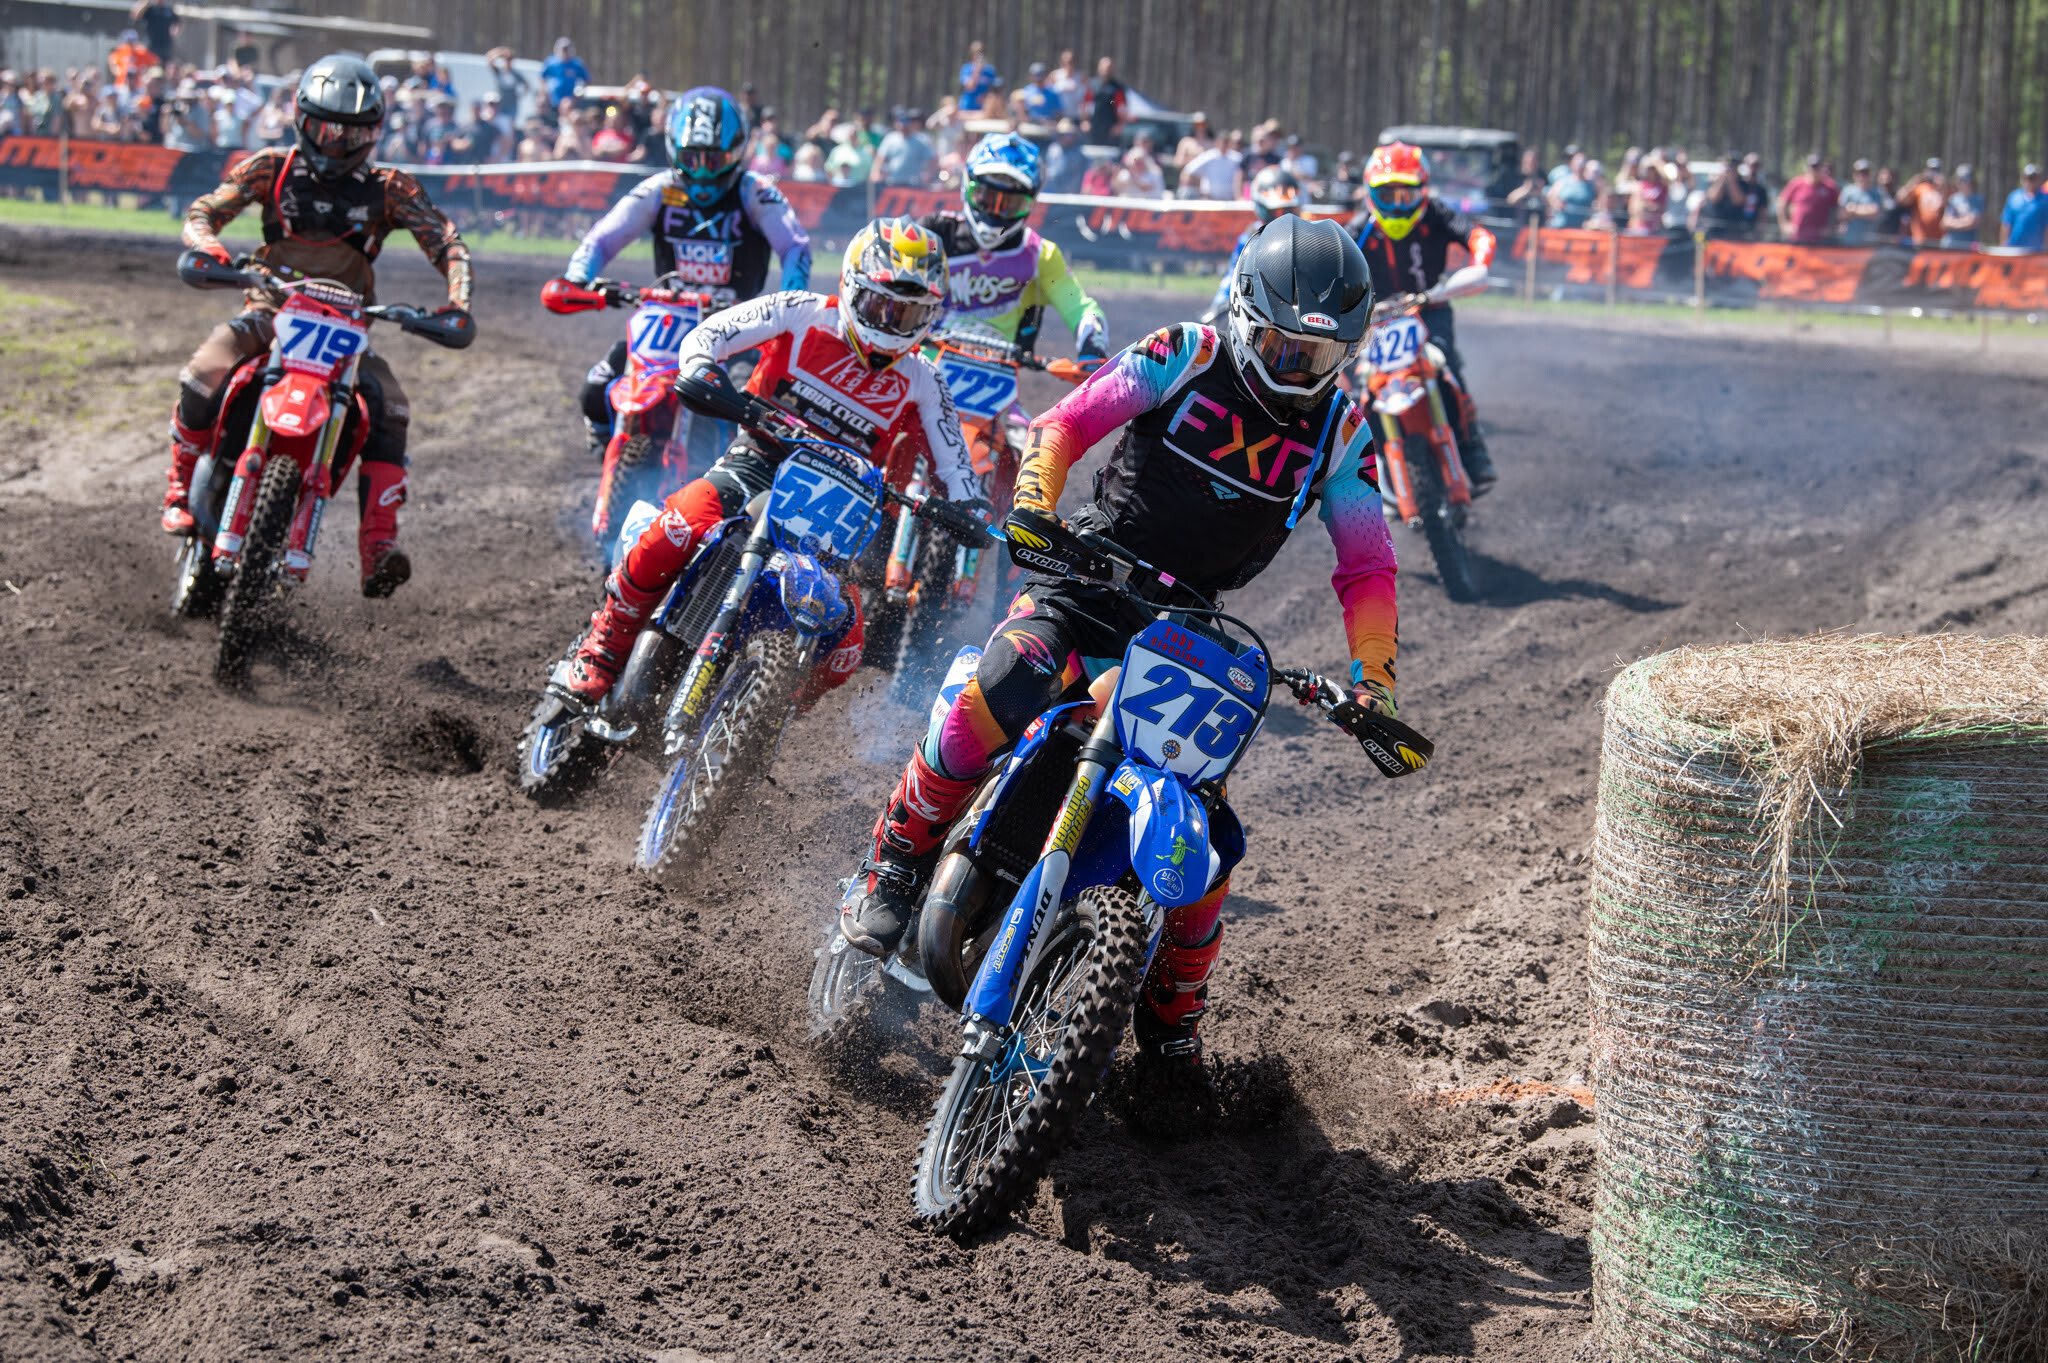 Toby Cleveland (Bells Electric/Wossner Pistons/FXR) grabbed the Lojak Cycle Sales holeshot and never looked back as he earned the FMF XC3 class win.